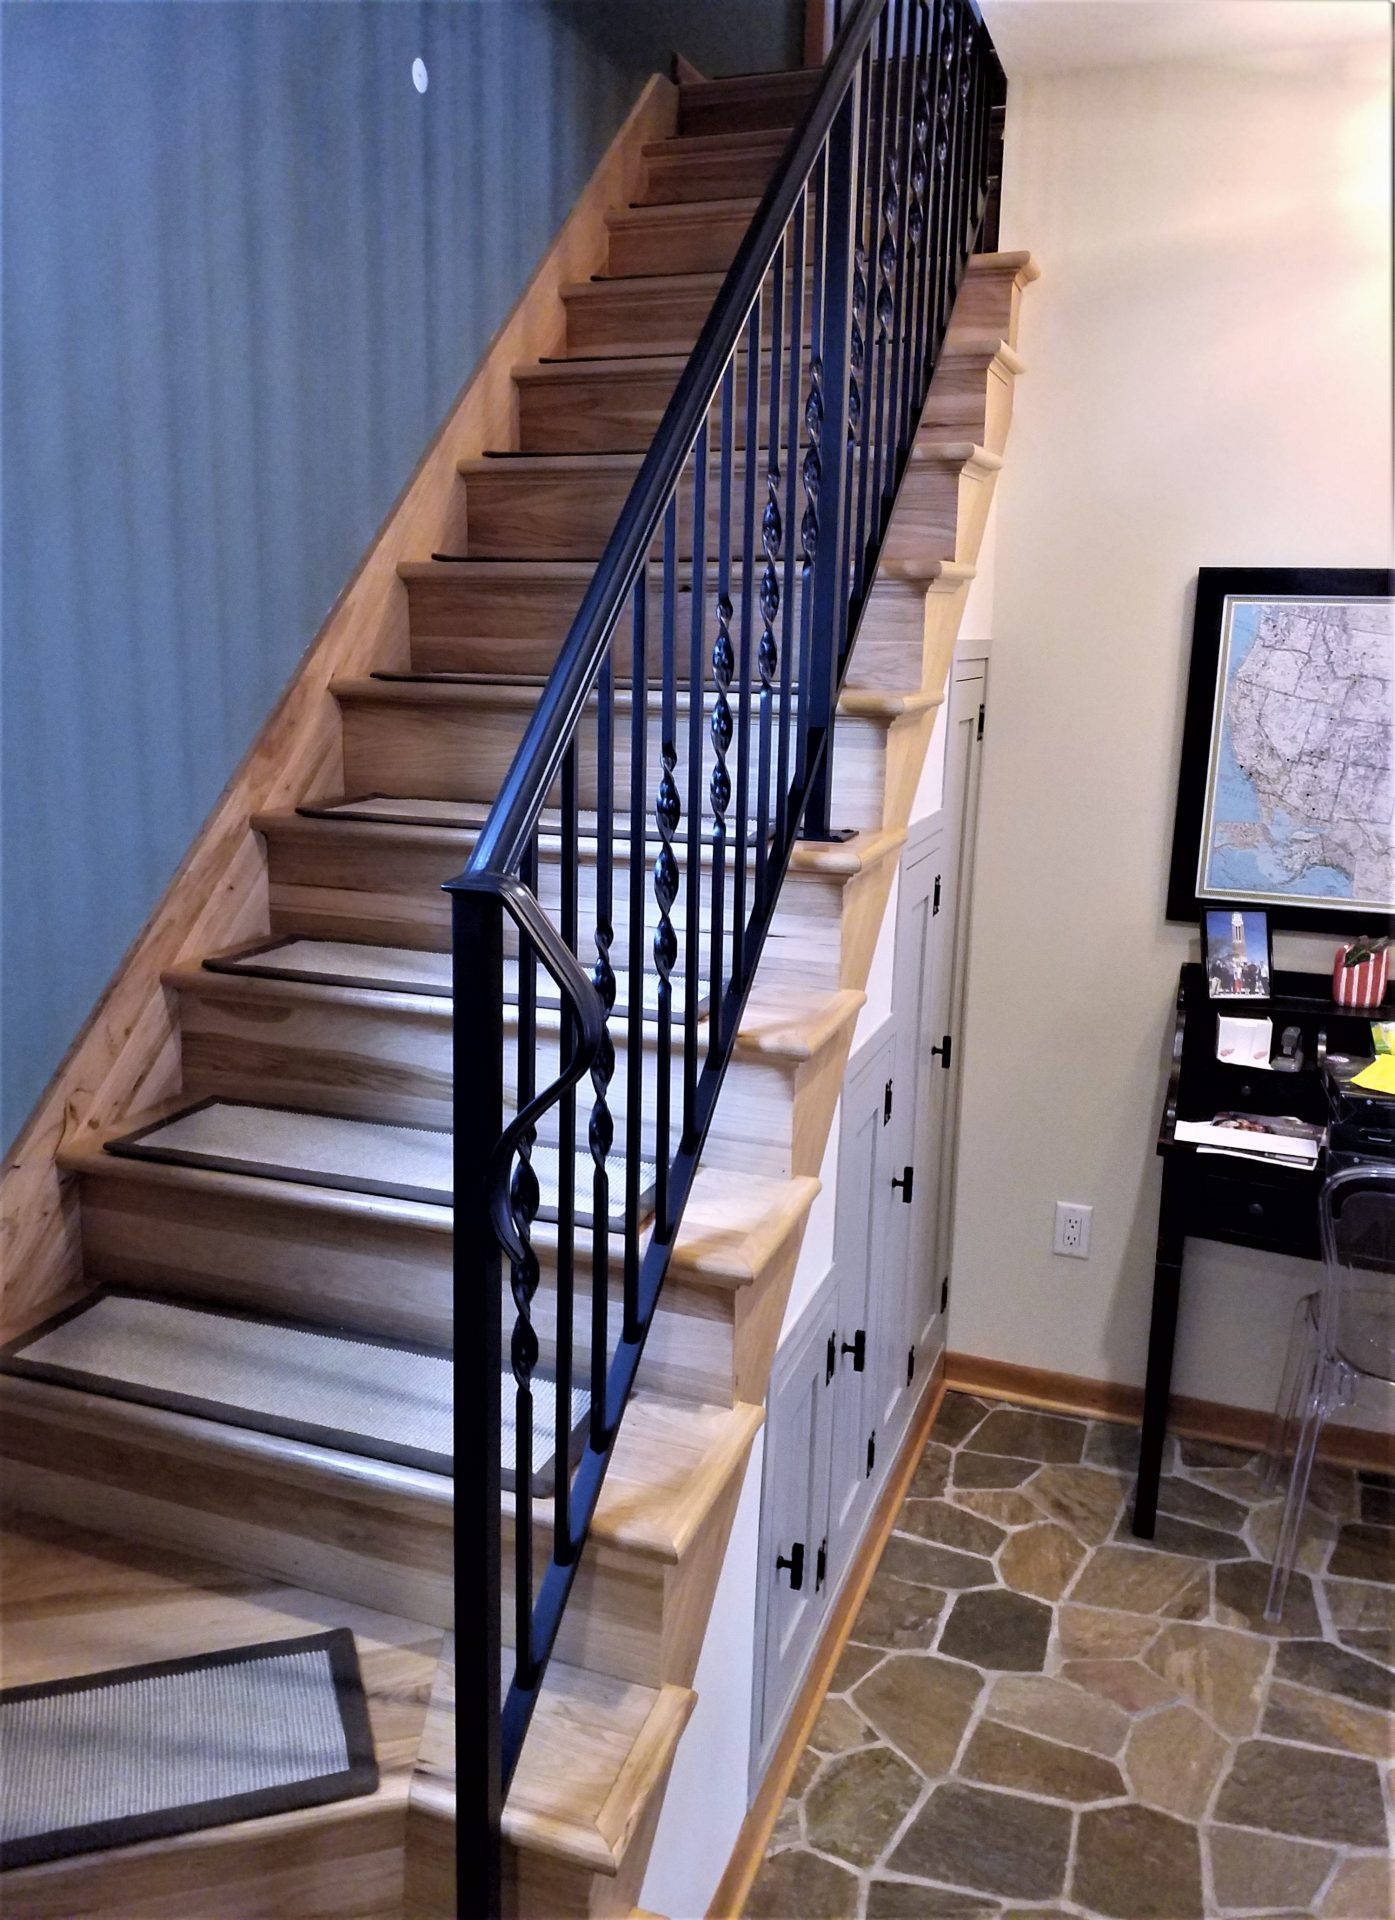 Stairs With Ornamental Iron Railing Wallpaper